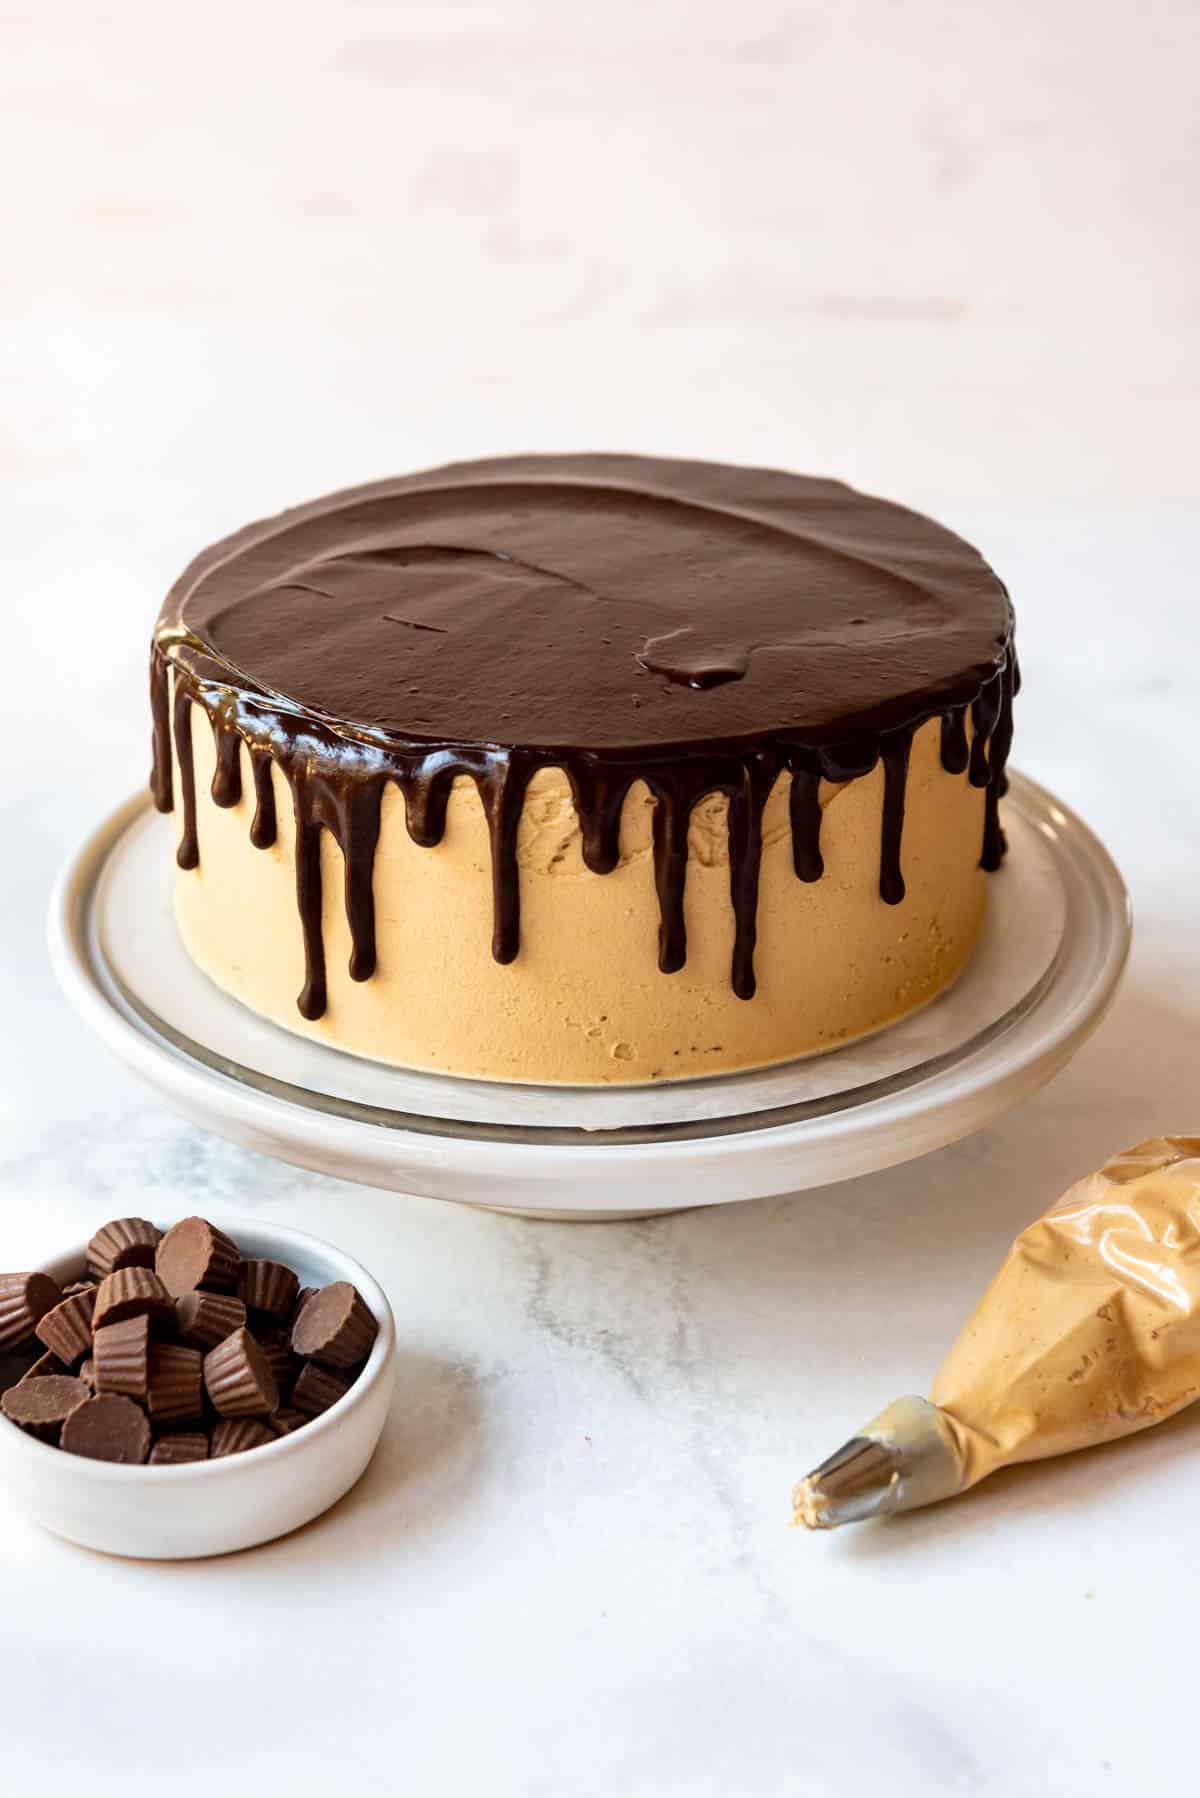 A chocolate peanut butter cake with peanut butter frosting on it, and chocolate ganache on top, dripping down the sides, on a white cake stand.